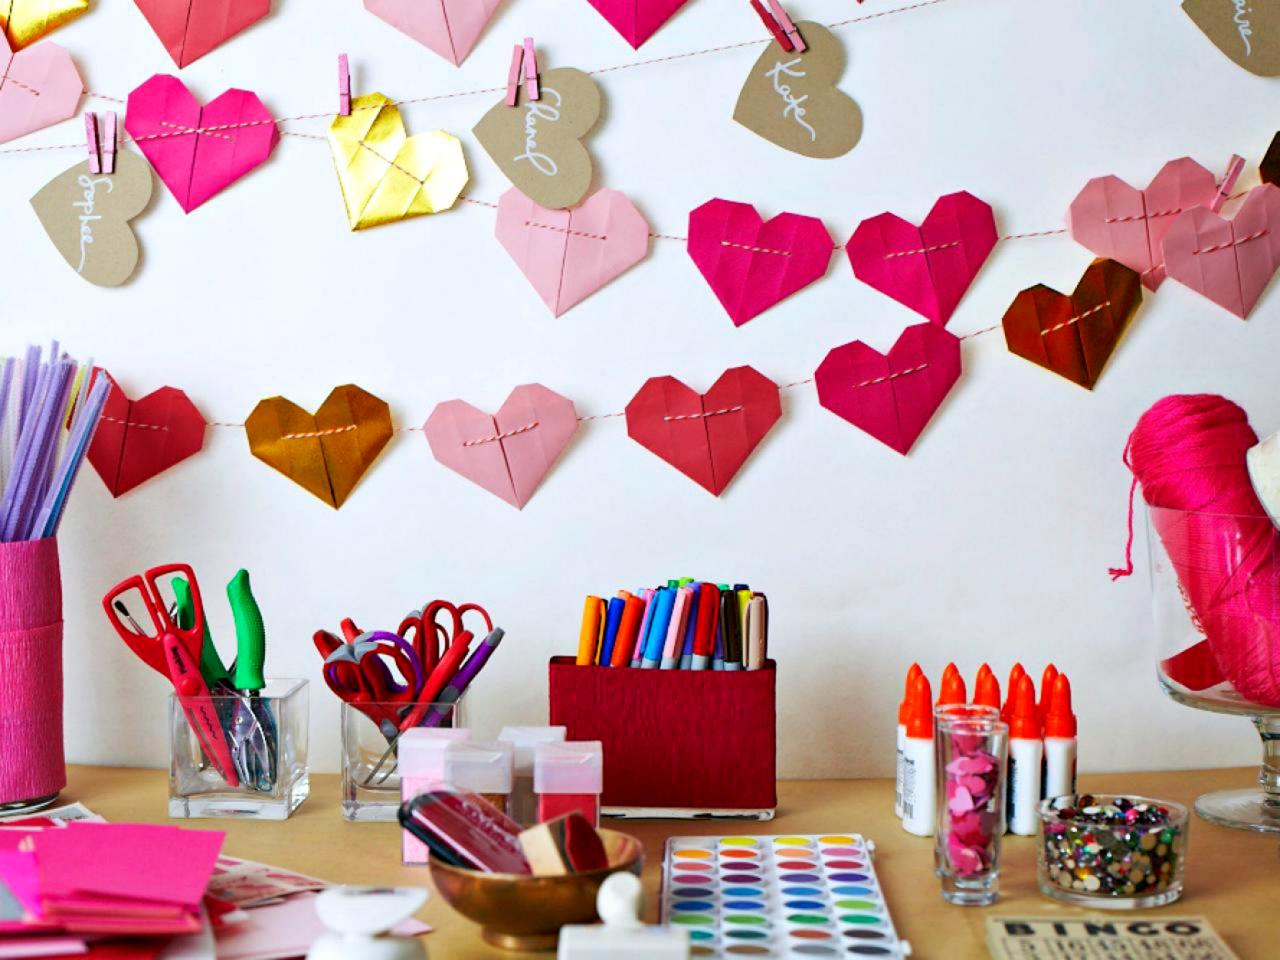 How to Throw a Galentine's Day Party | HGTV's Decorating & Design Blog | HGTV